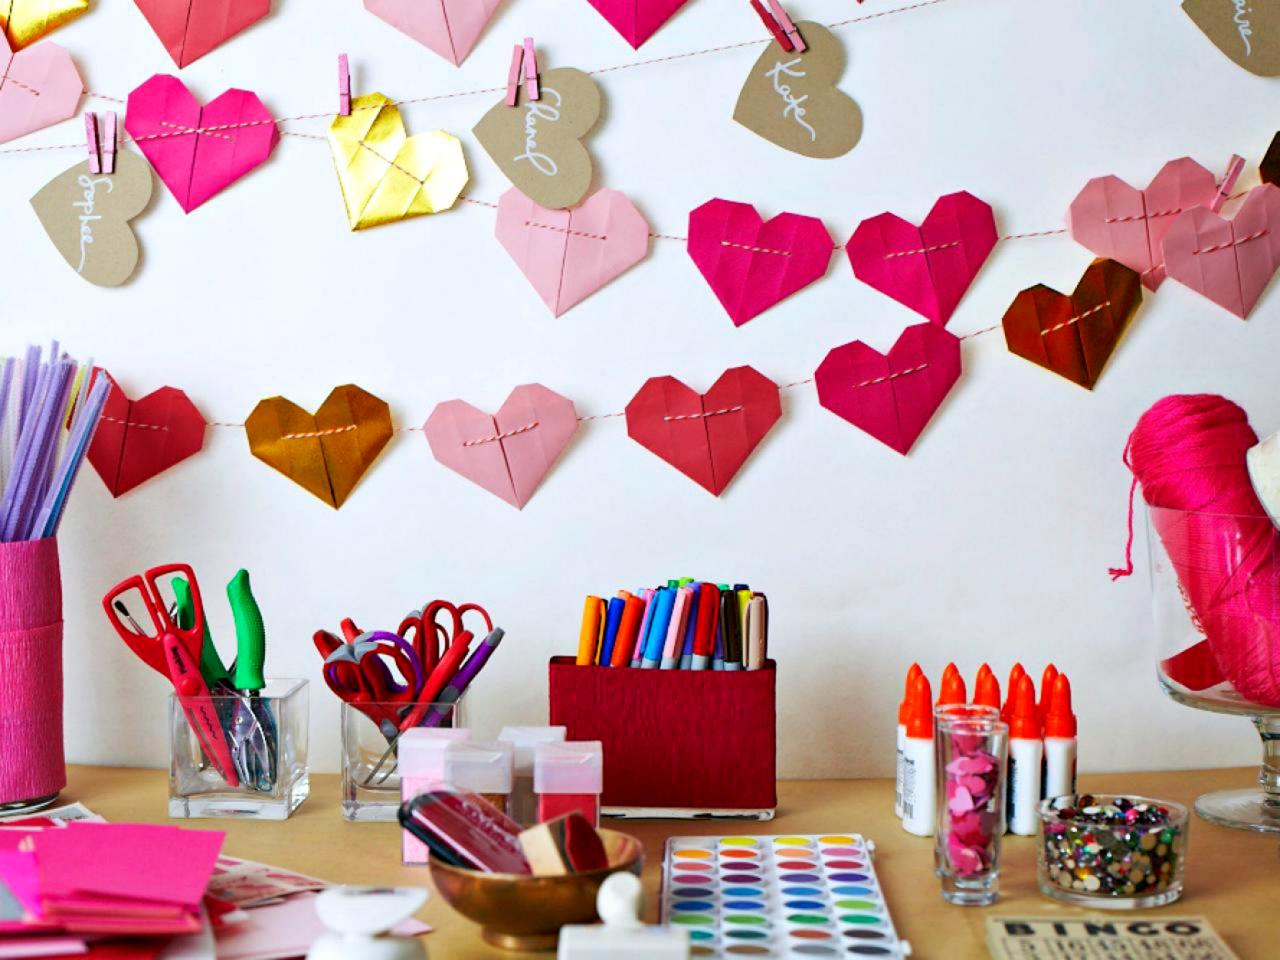 How to Throw a Galentine's Day Party | HGTV's Decorating & Design Blog | HGTV